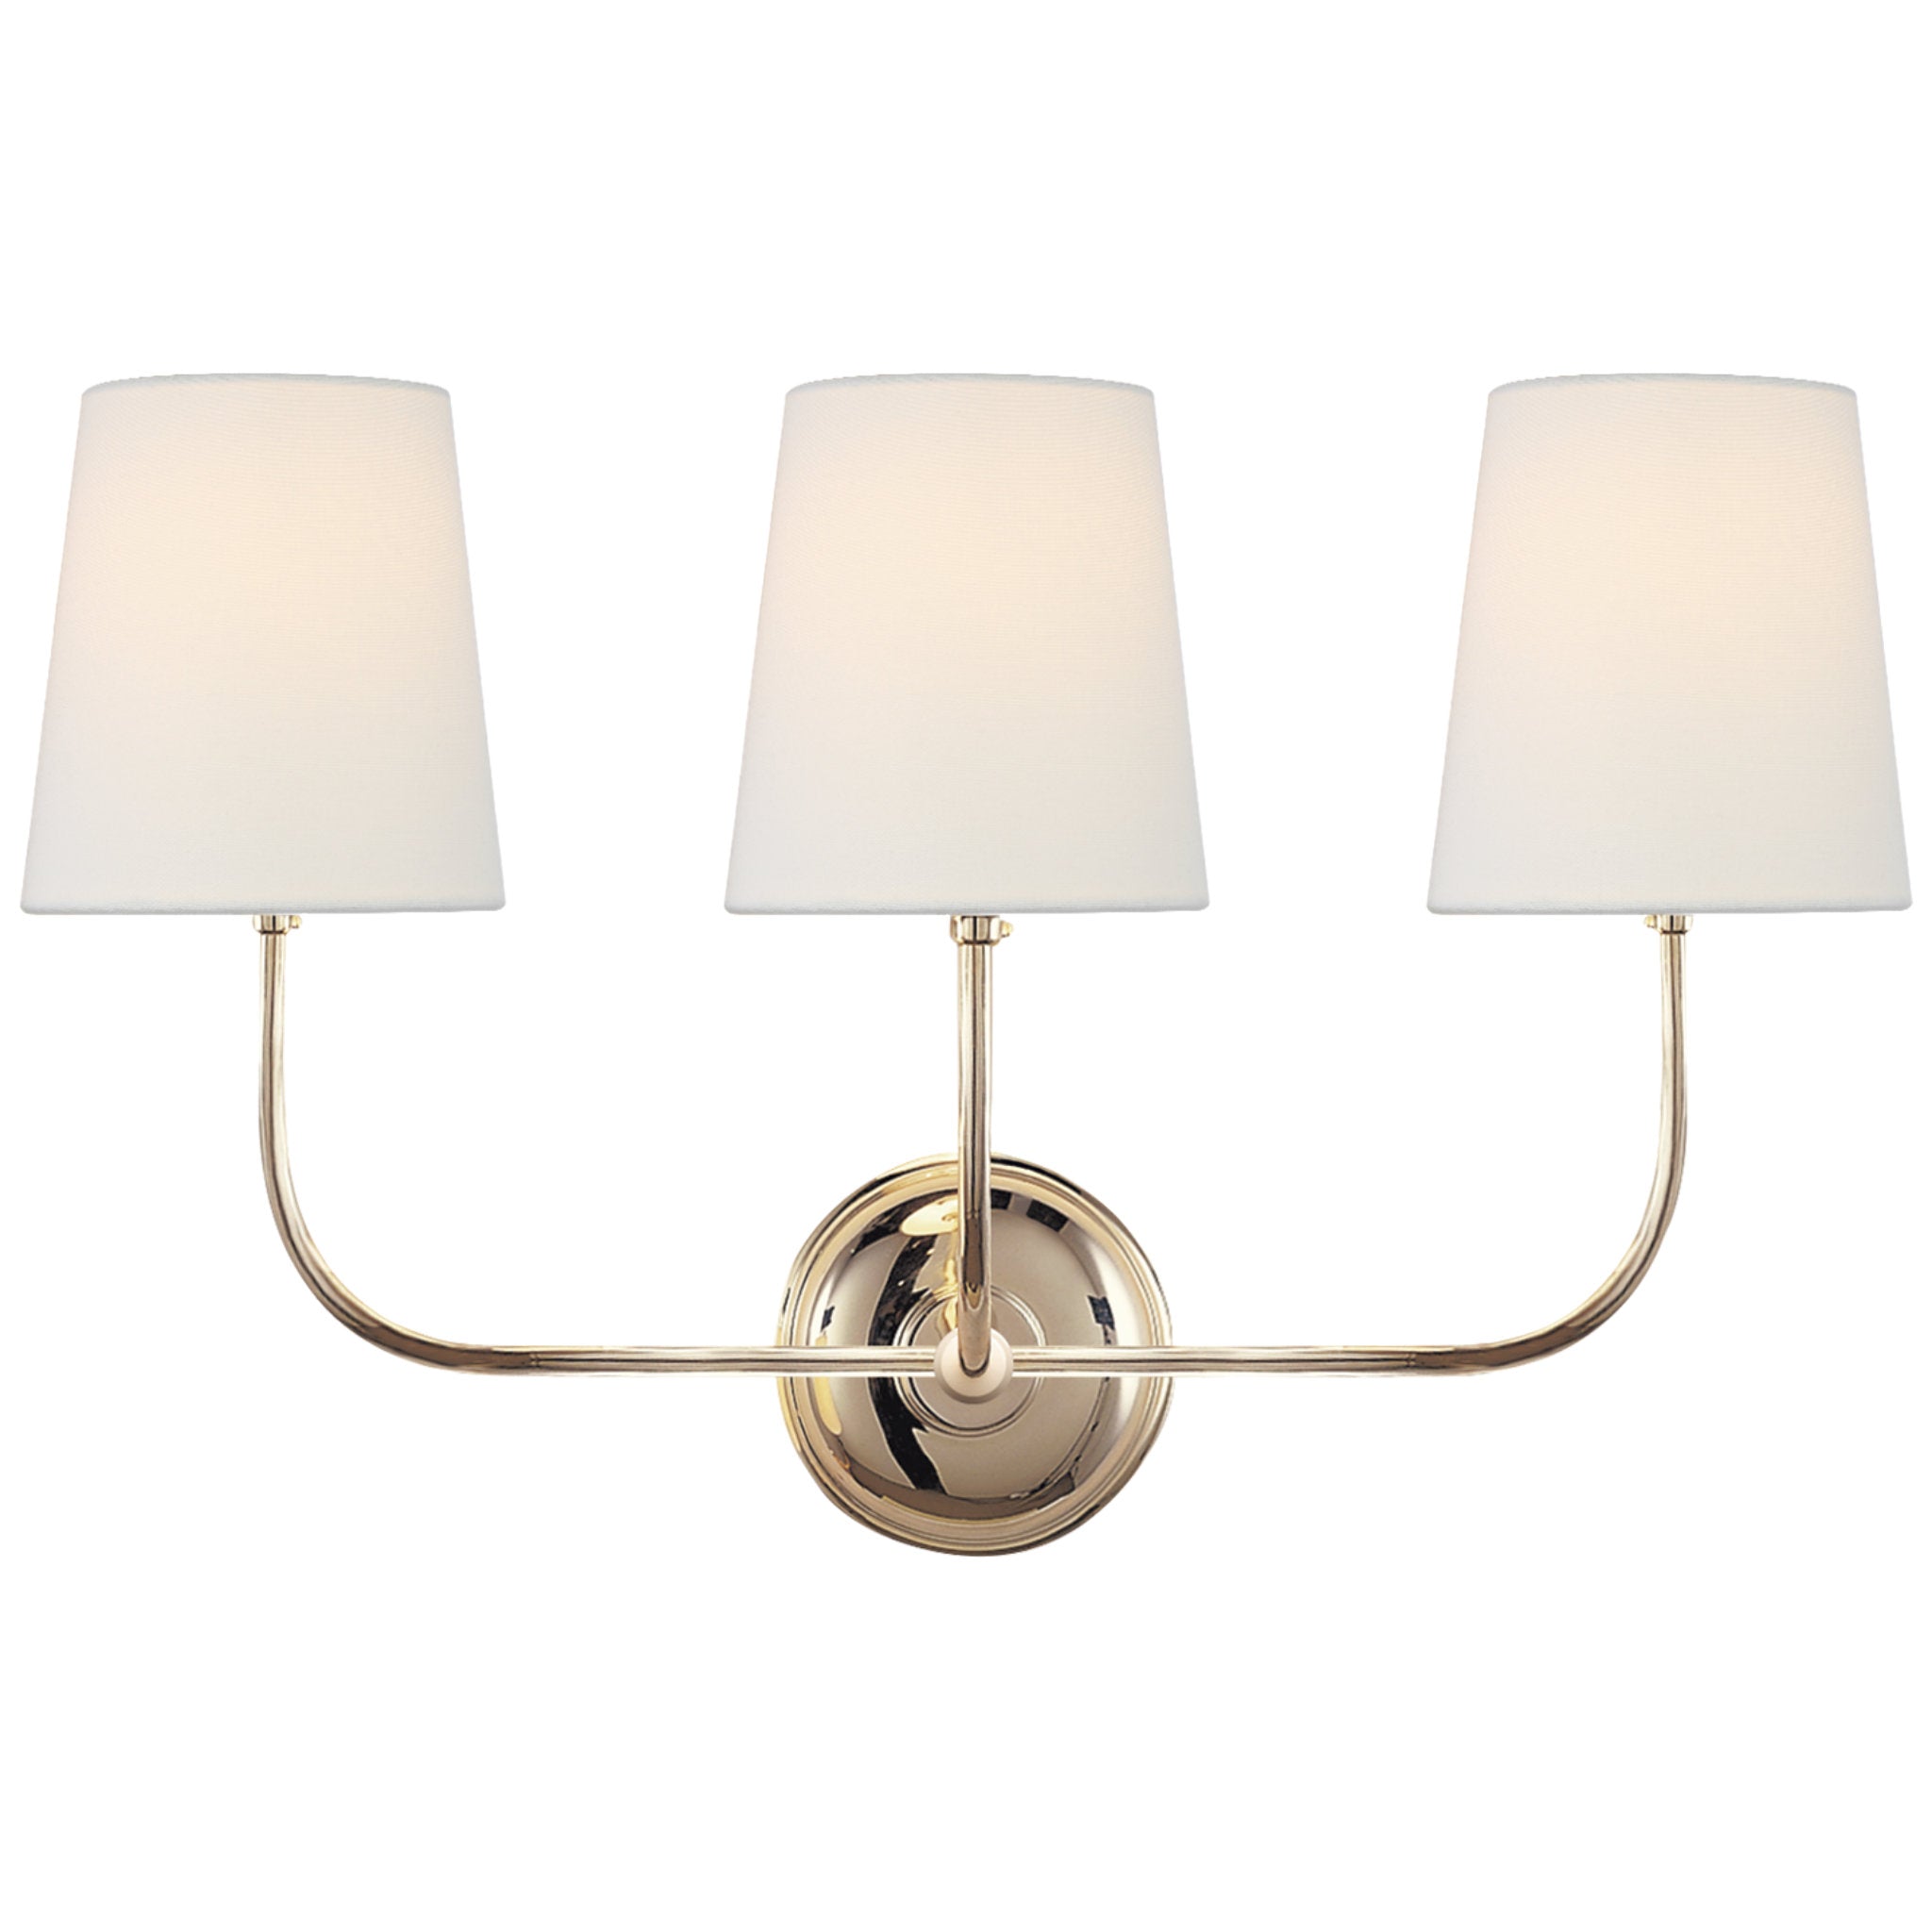 Thomas O'Brien Vendome Triple Sconce in Polished Nickel with Linen Shades